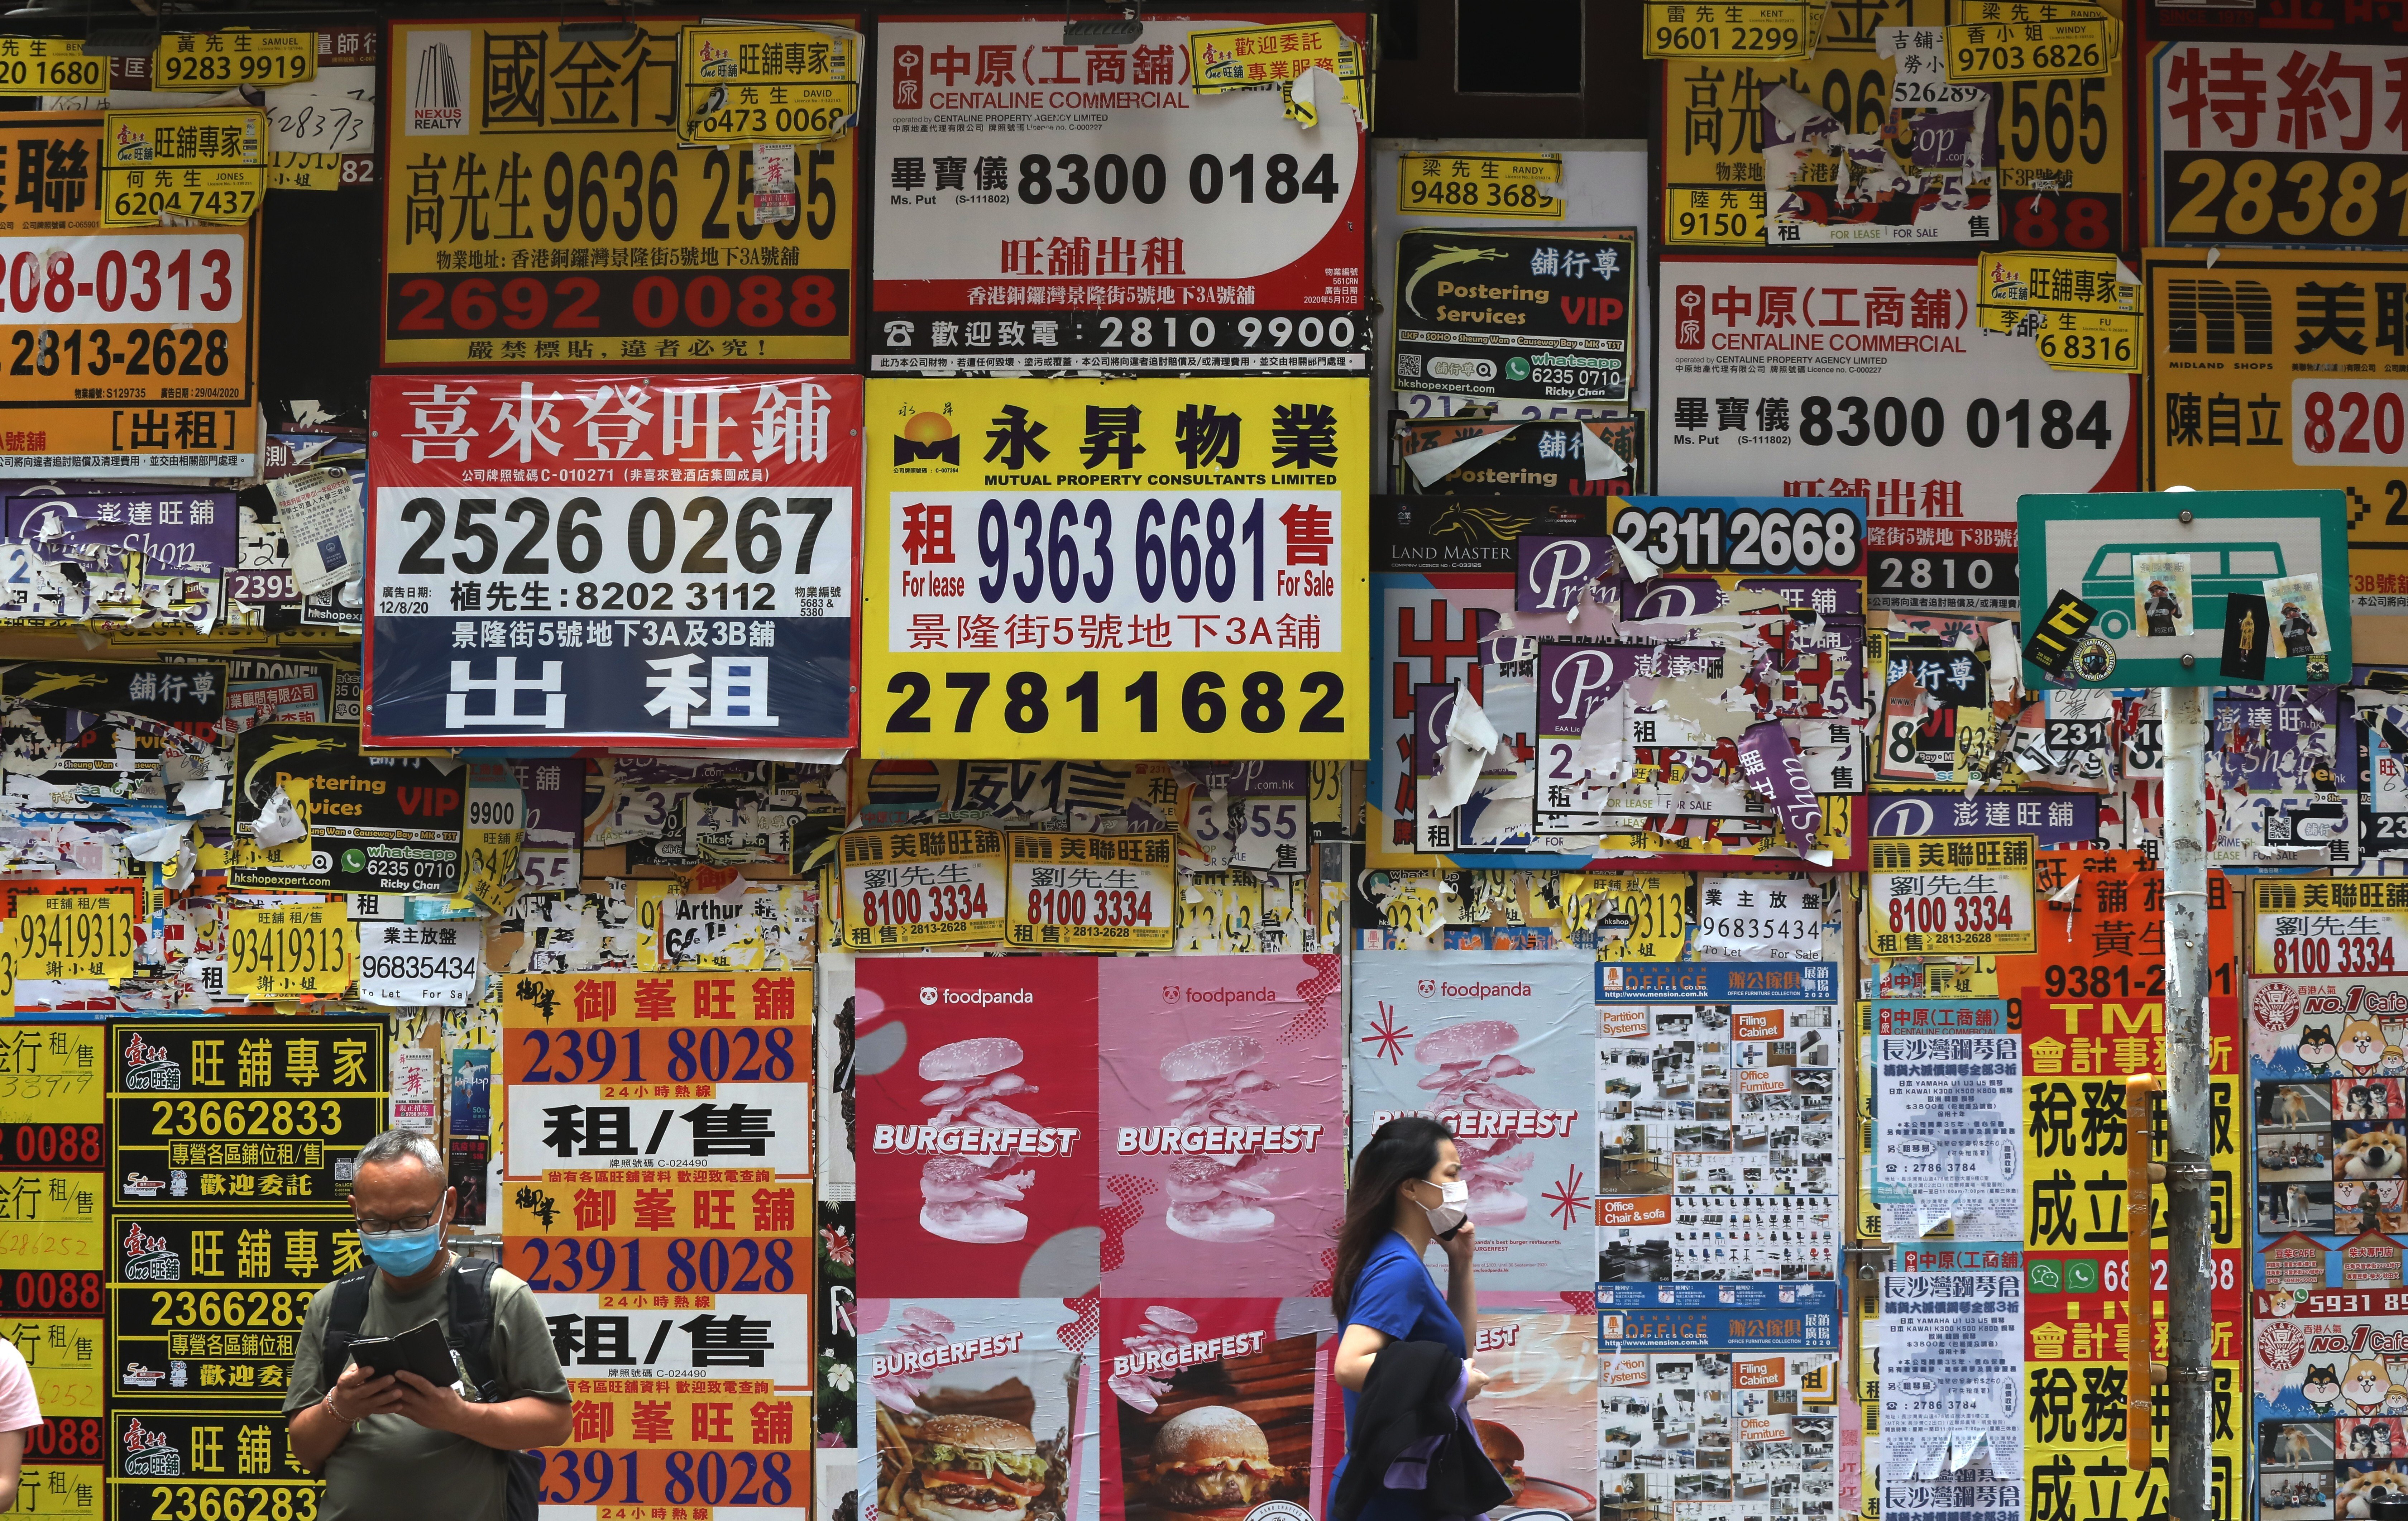 Pedestrians pass a store covered in posters for property agents in Causeway Bay, Hong Kong. Photo: K. Y. Cheng